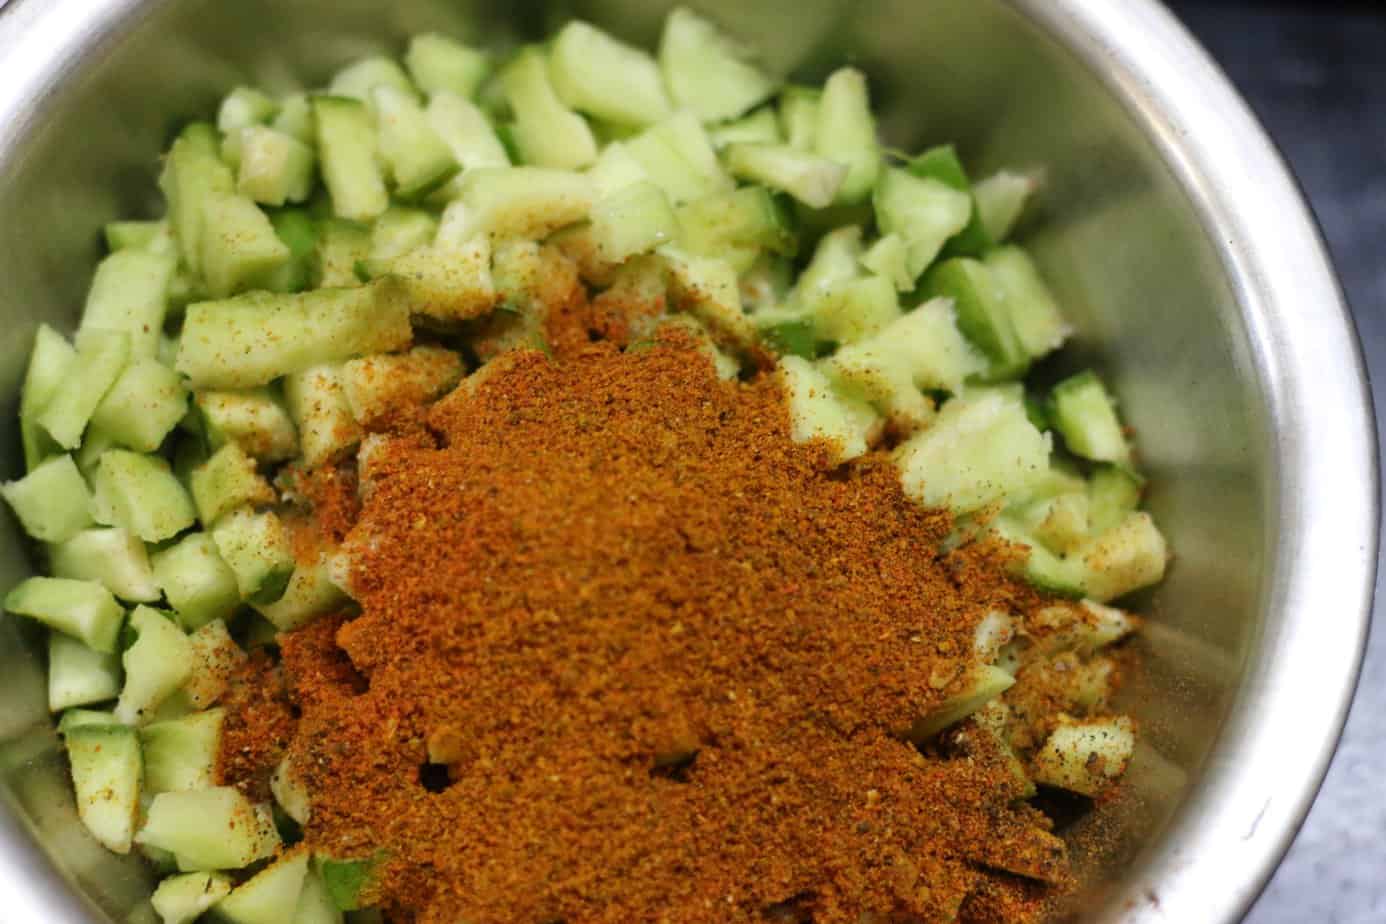 pickling spices added to raw mangoes